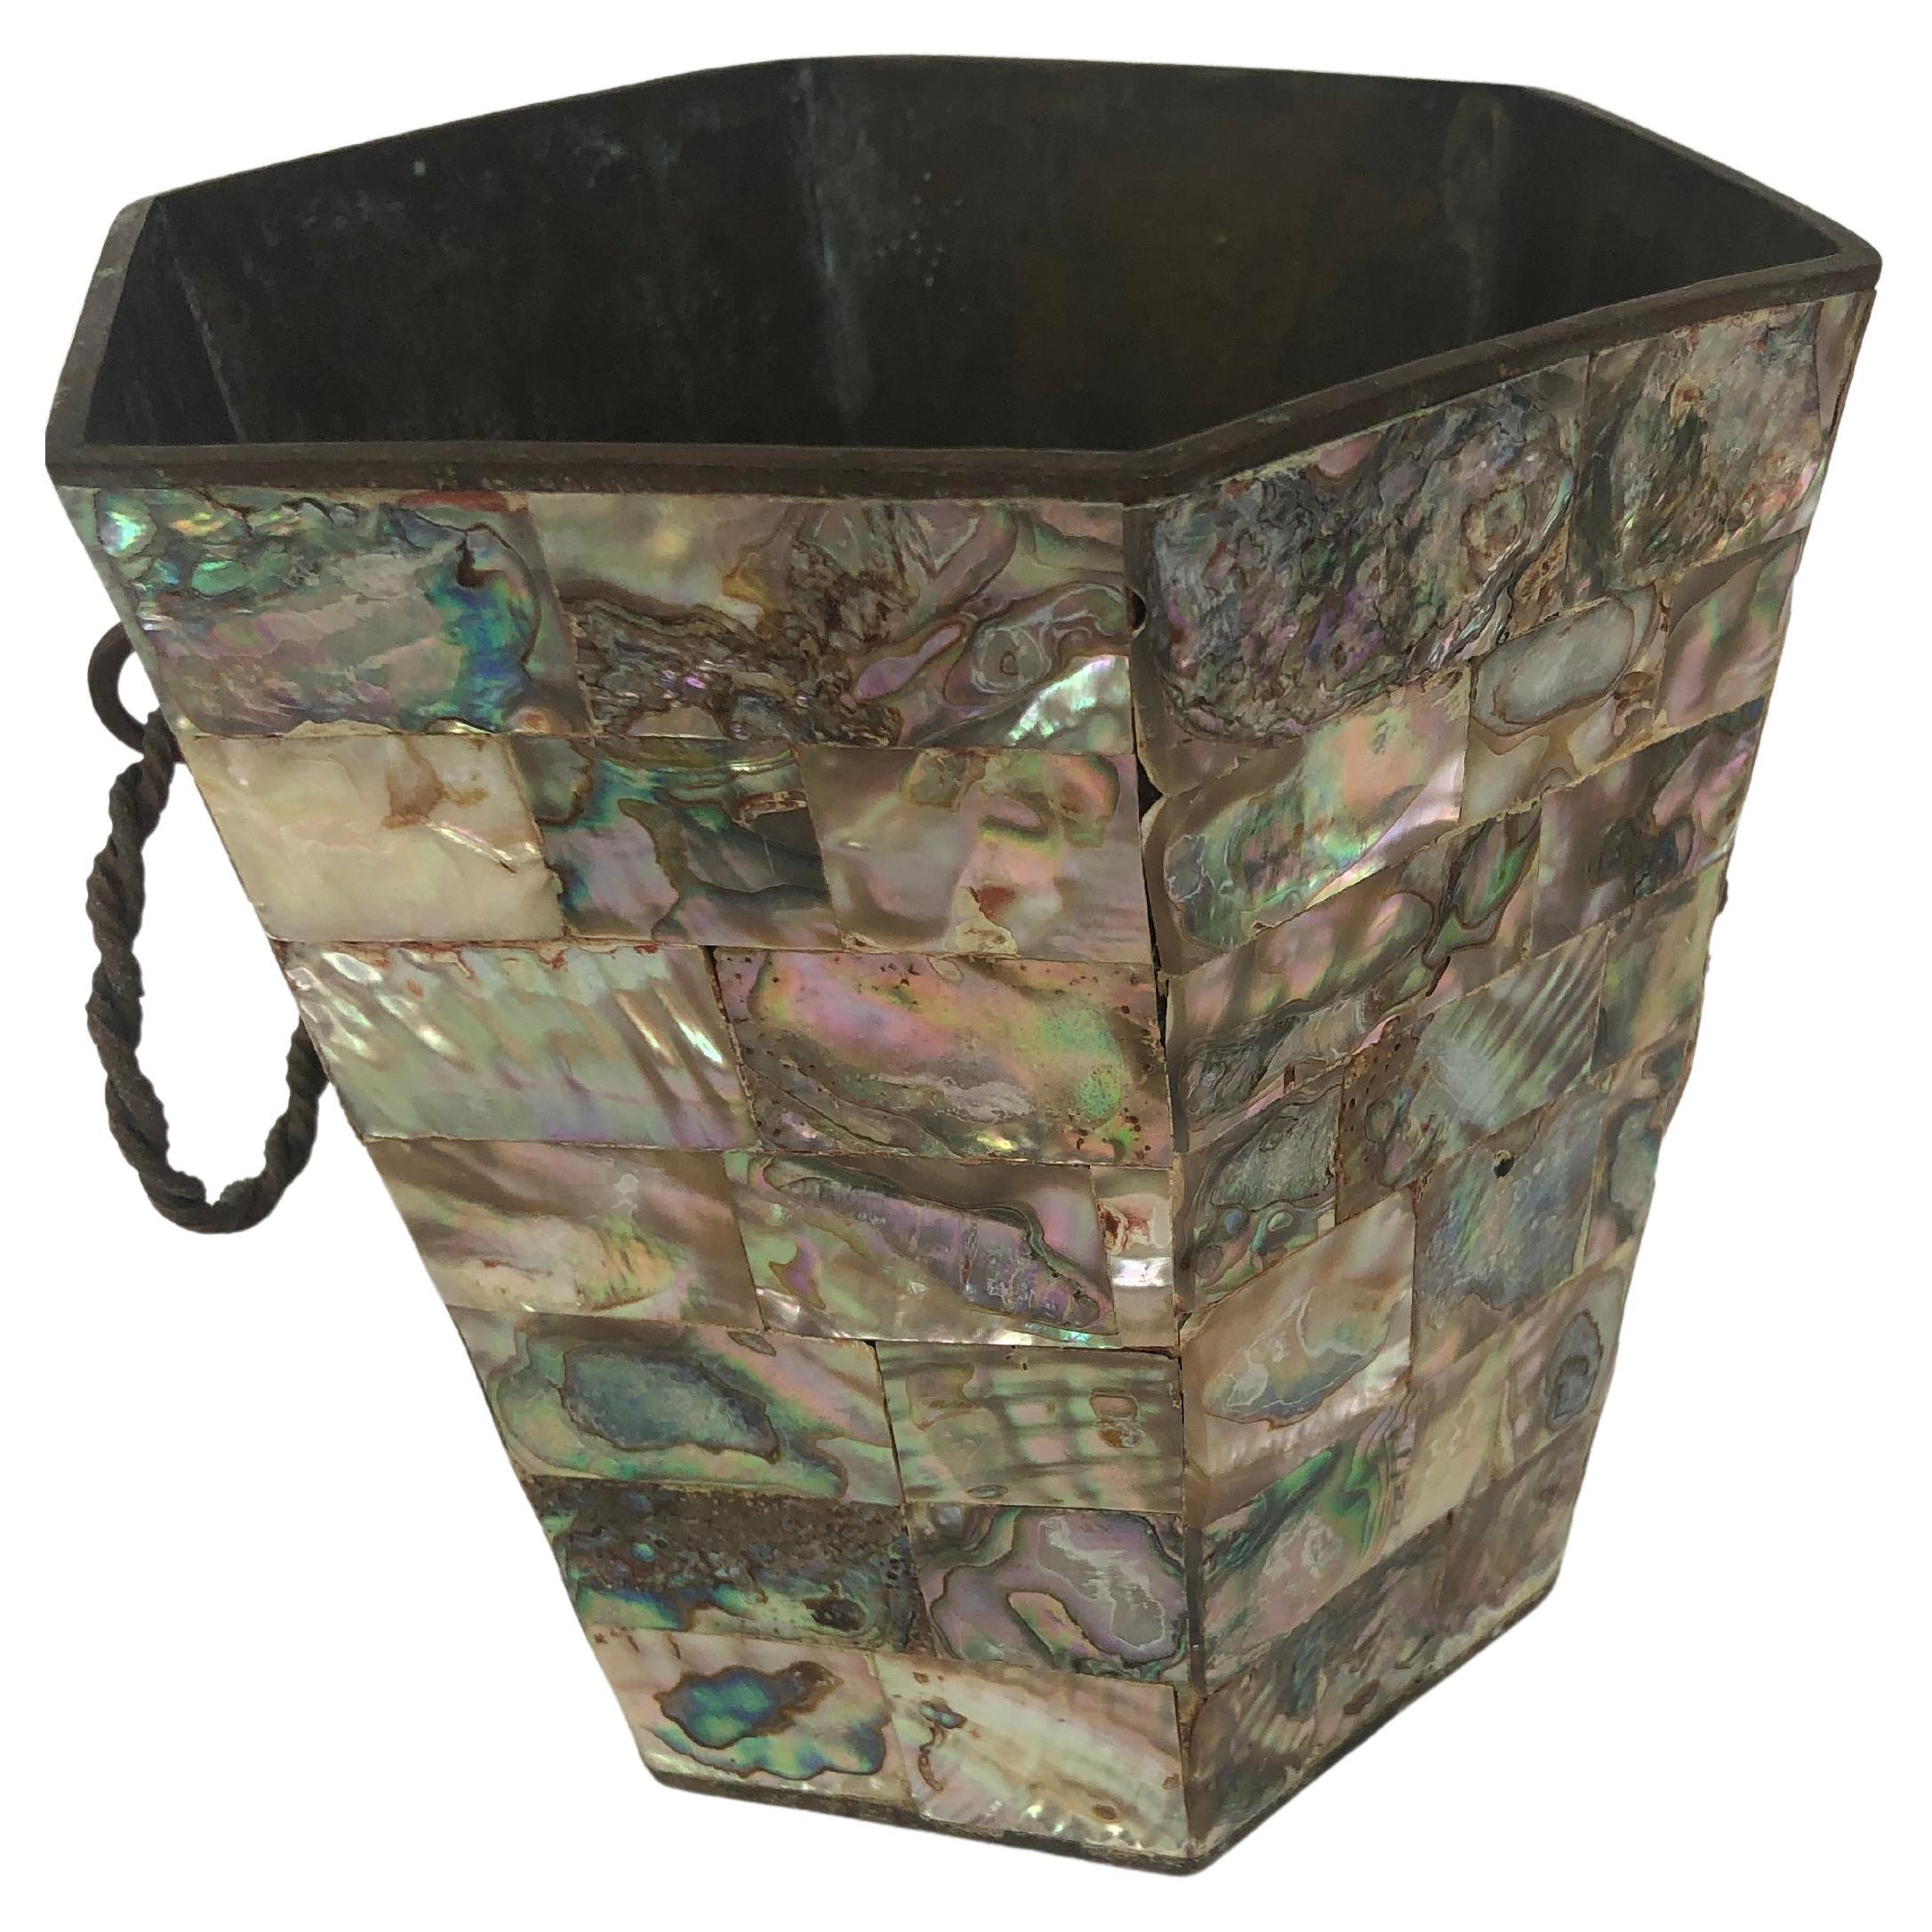 Vintage Hexagonal Form Mexican Abalone and Brass Ice Bucket with Tongs and twisted ring handles. Colorful individual tiles of abalone adorn the metal bucket. 